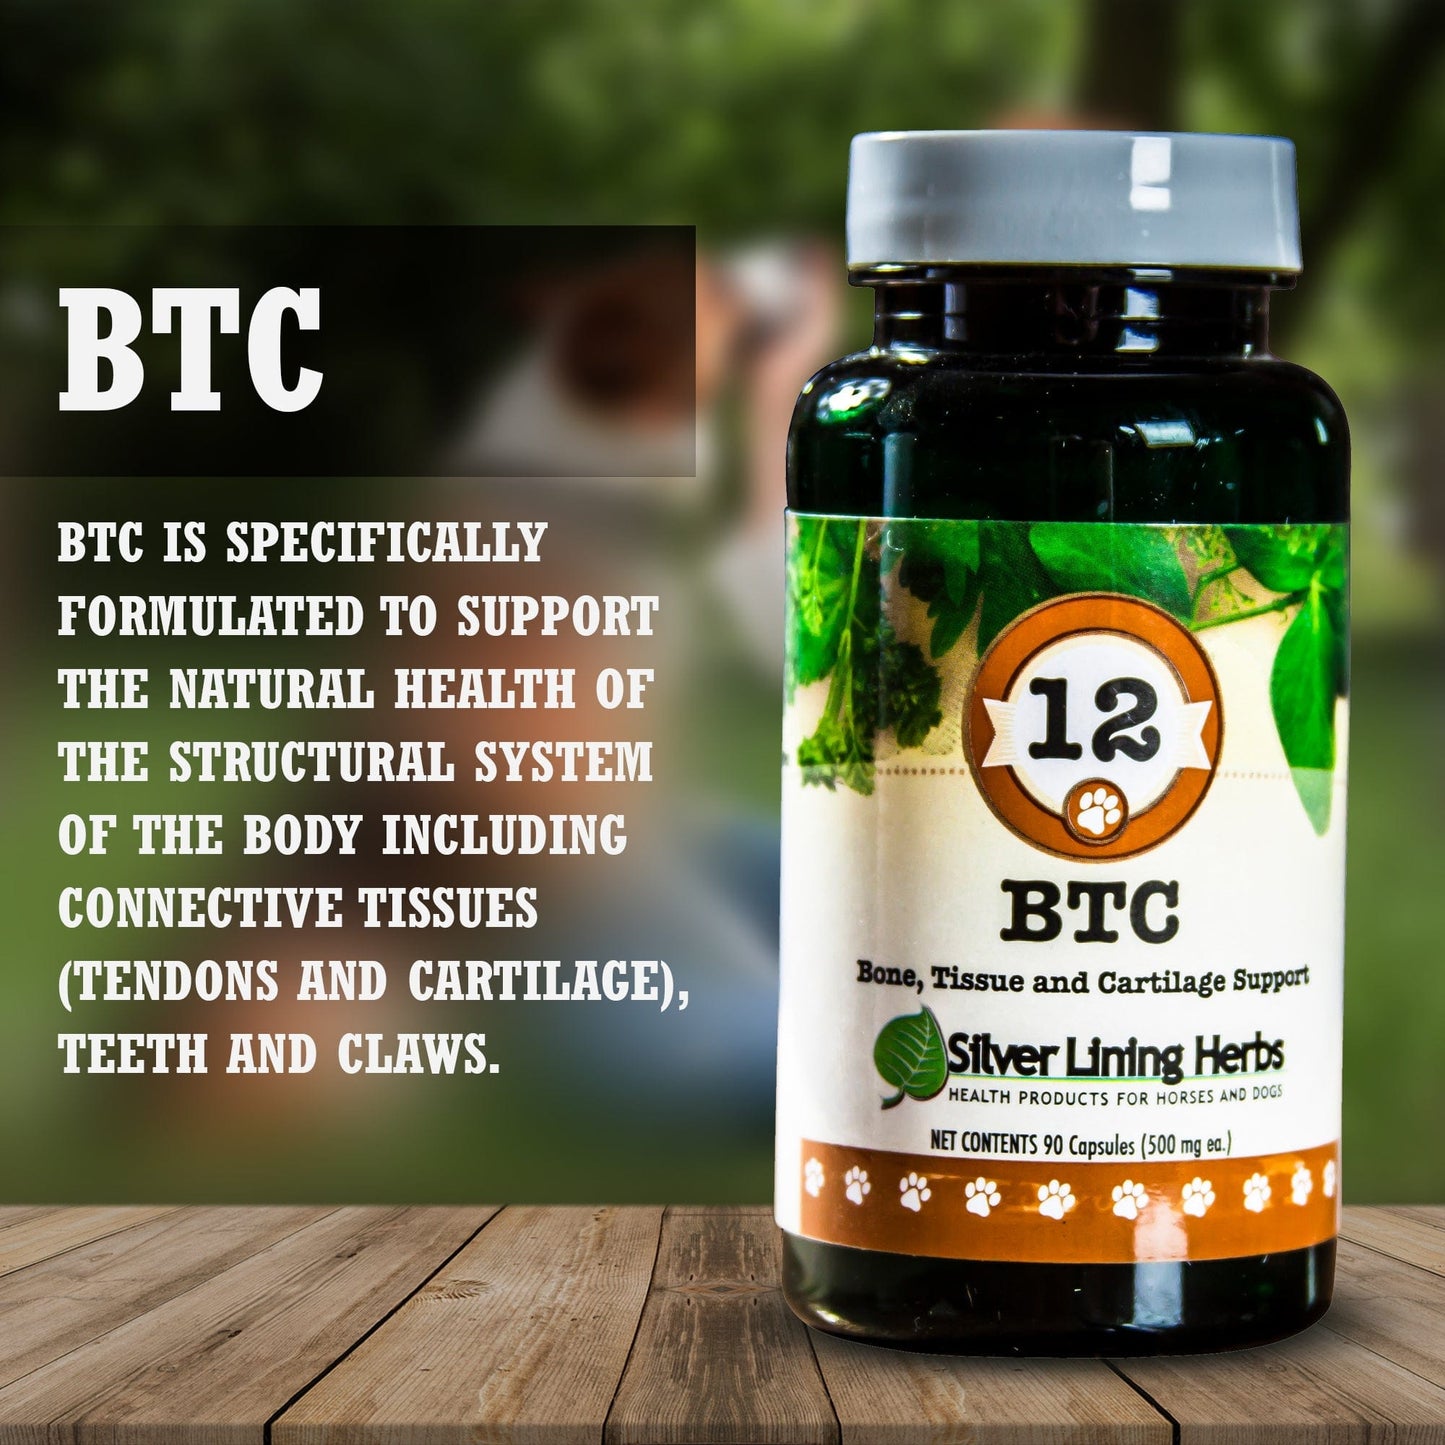 BTC Bone Tissue and Cartilage Support - Silver Lining Herbs